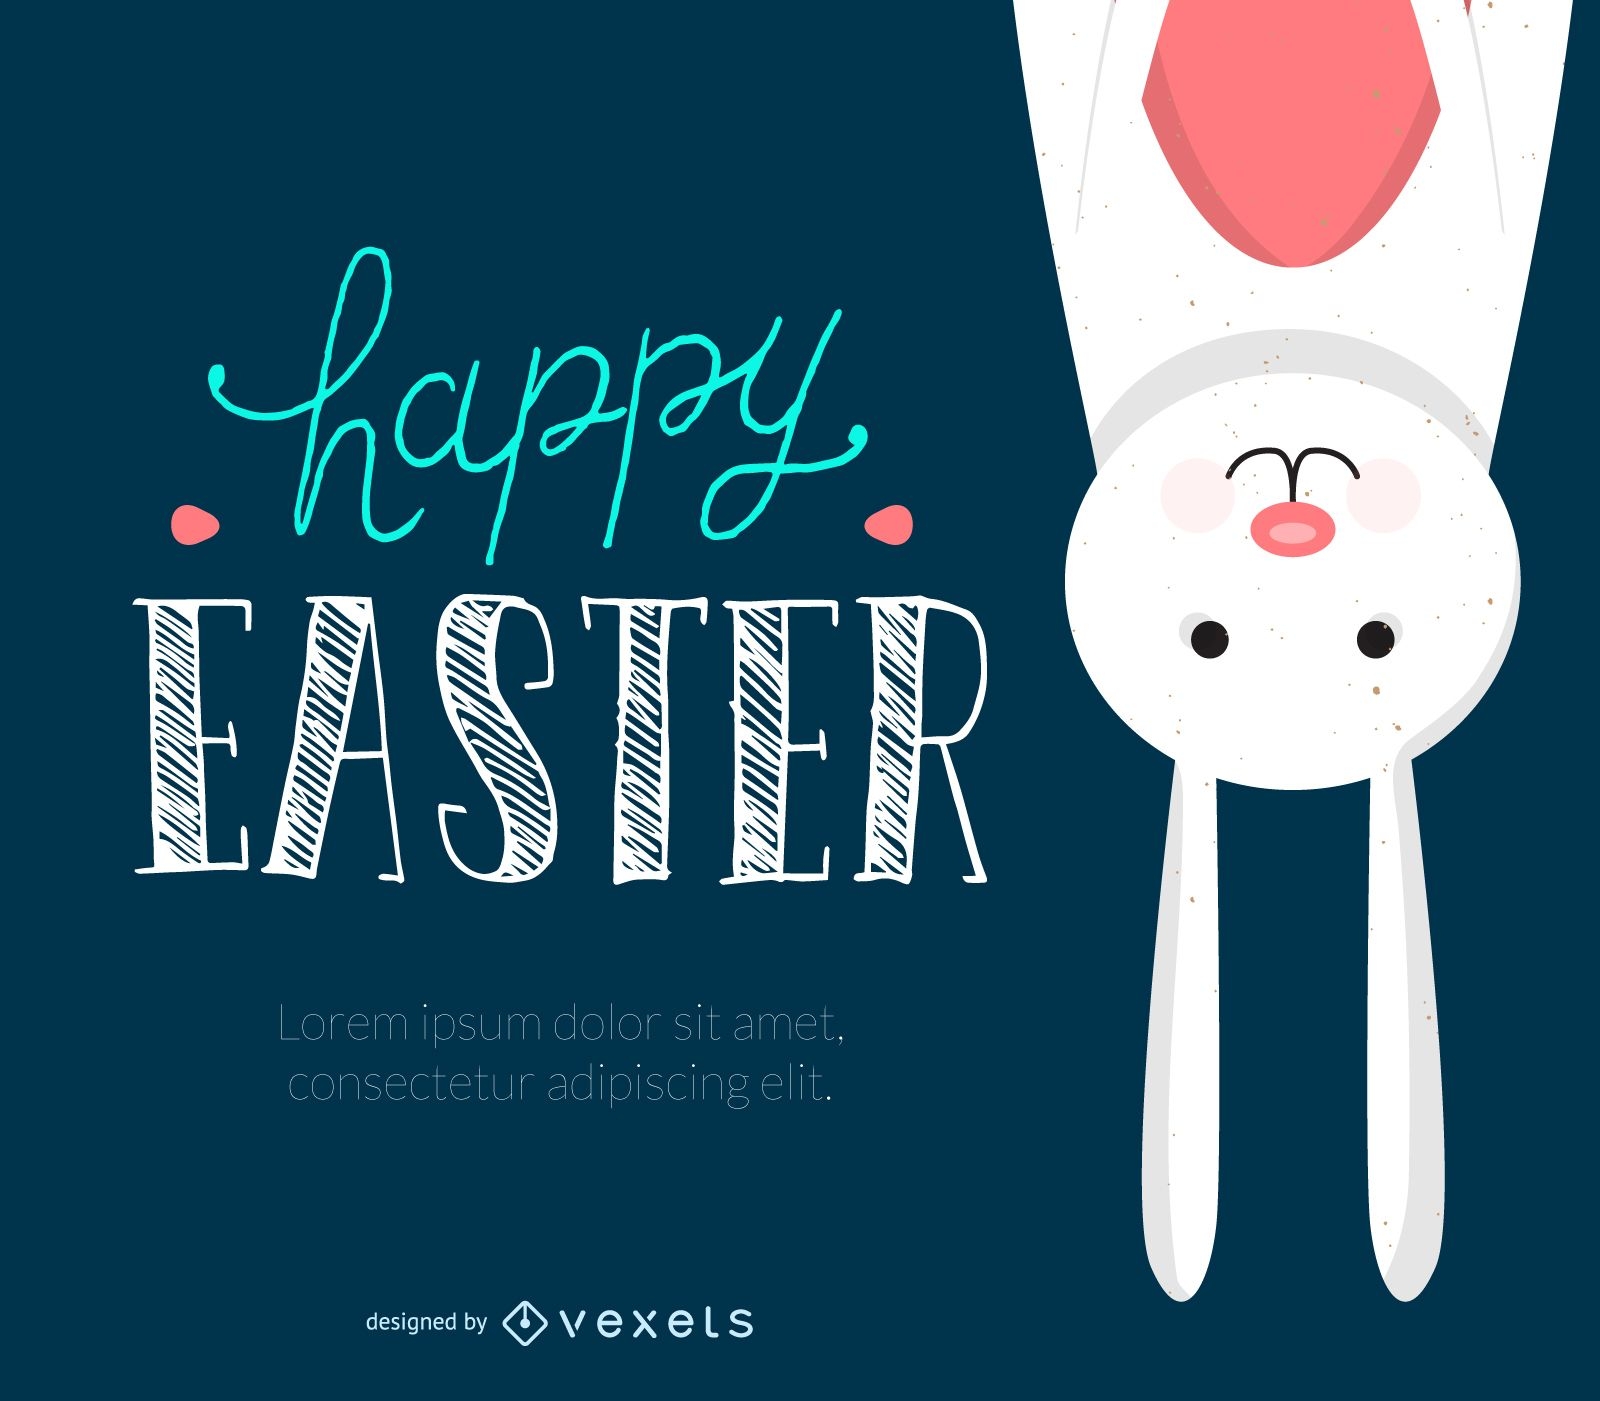 Funny Easter design with illustrations